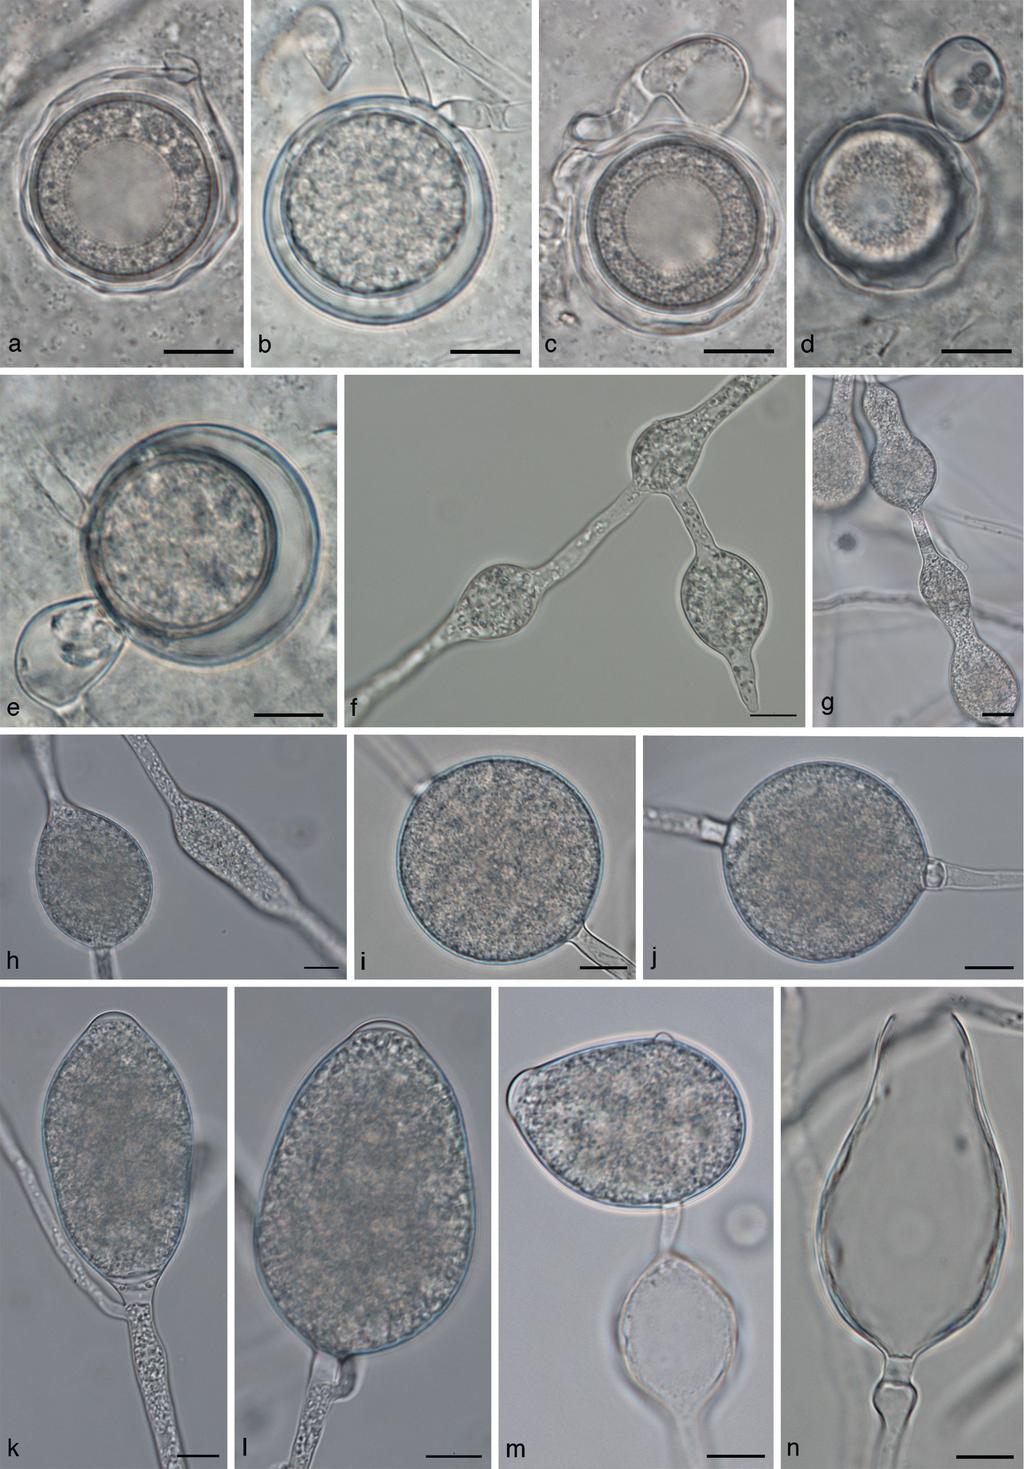 L. Bertier et al.: Phytophthora clade 8b 71 Fig. 6 Phytophthora dauci morphology. a e. Oogonia; a, c, d. oogonia with wavy oogonium walls; b. intercalary oogonium; c e. paragynous antheridia; f h.